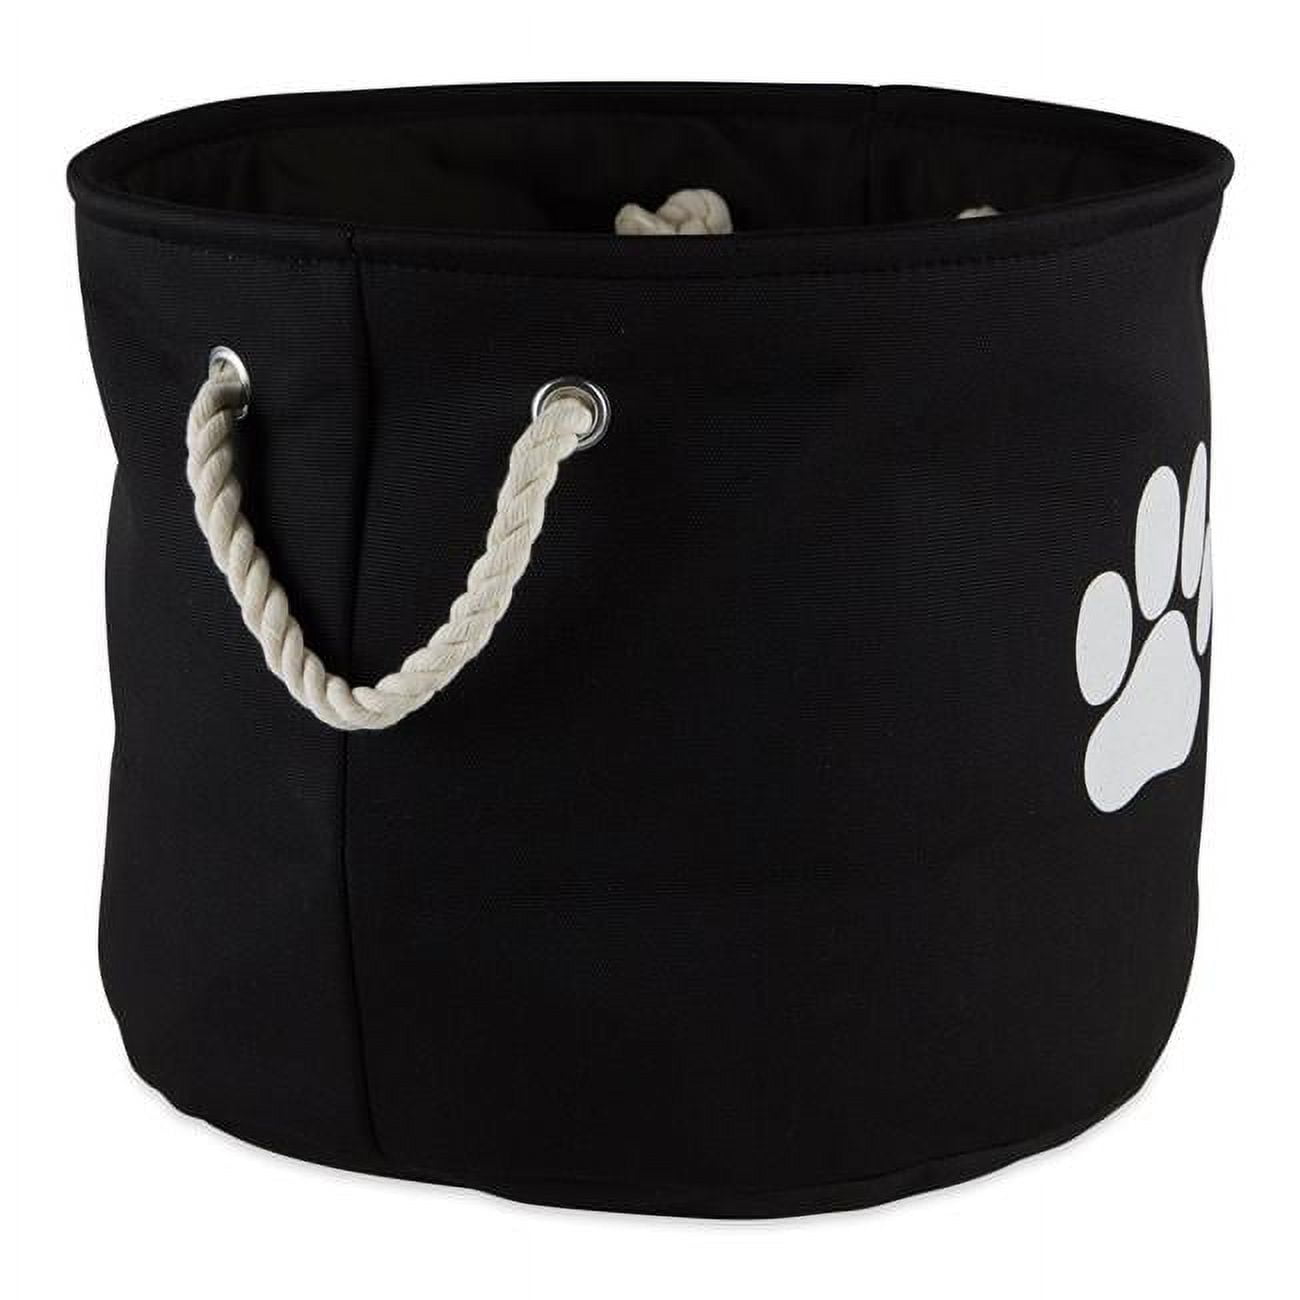 Picture of Design Imports CAMZ12483 Paw Round Polyester Pet Bin, Black - Small